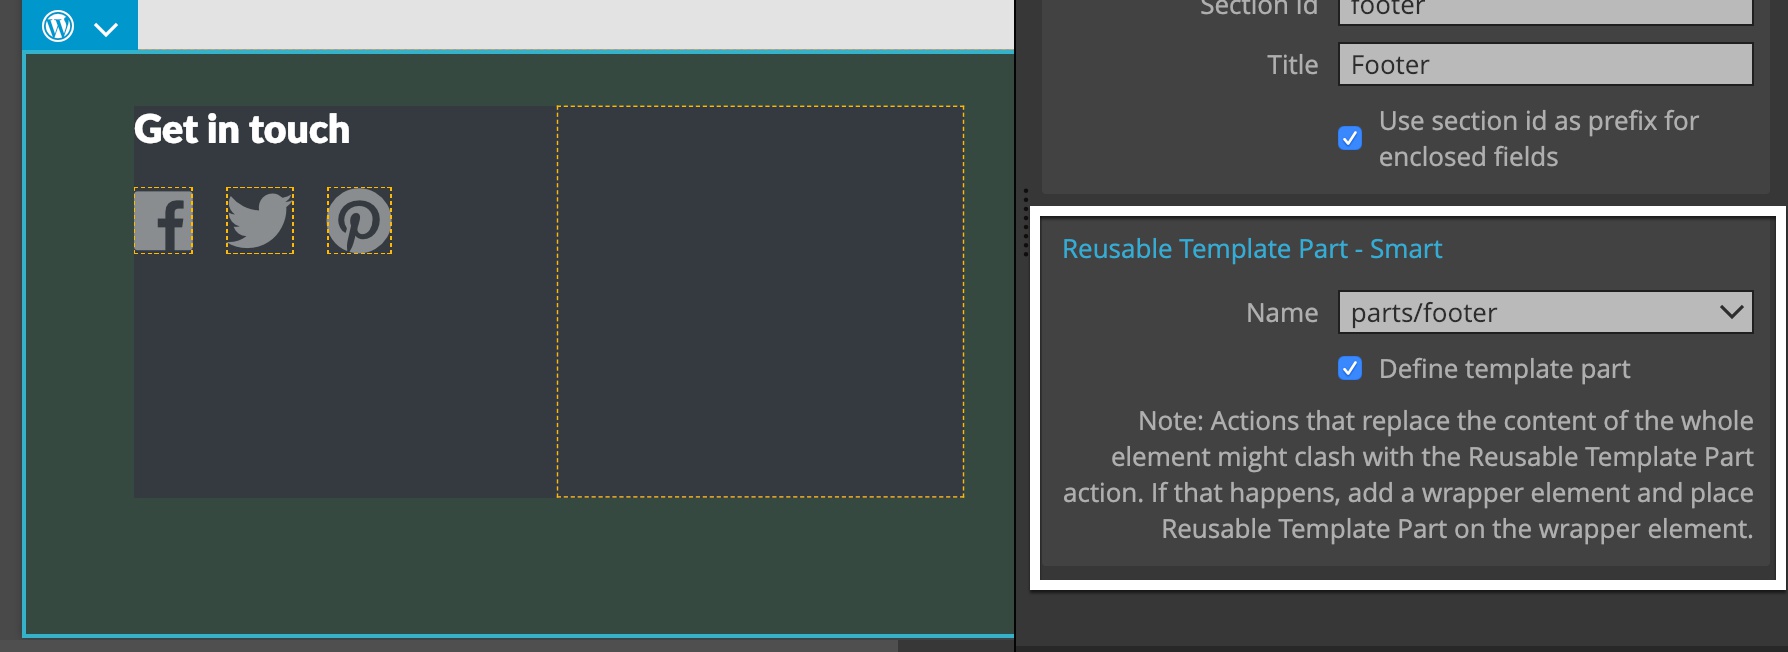 Defining a template part for the footer.